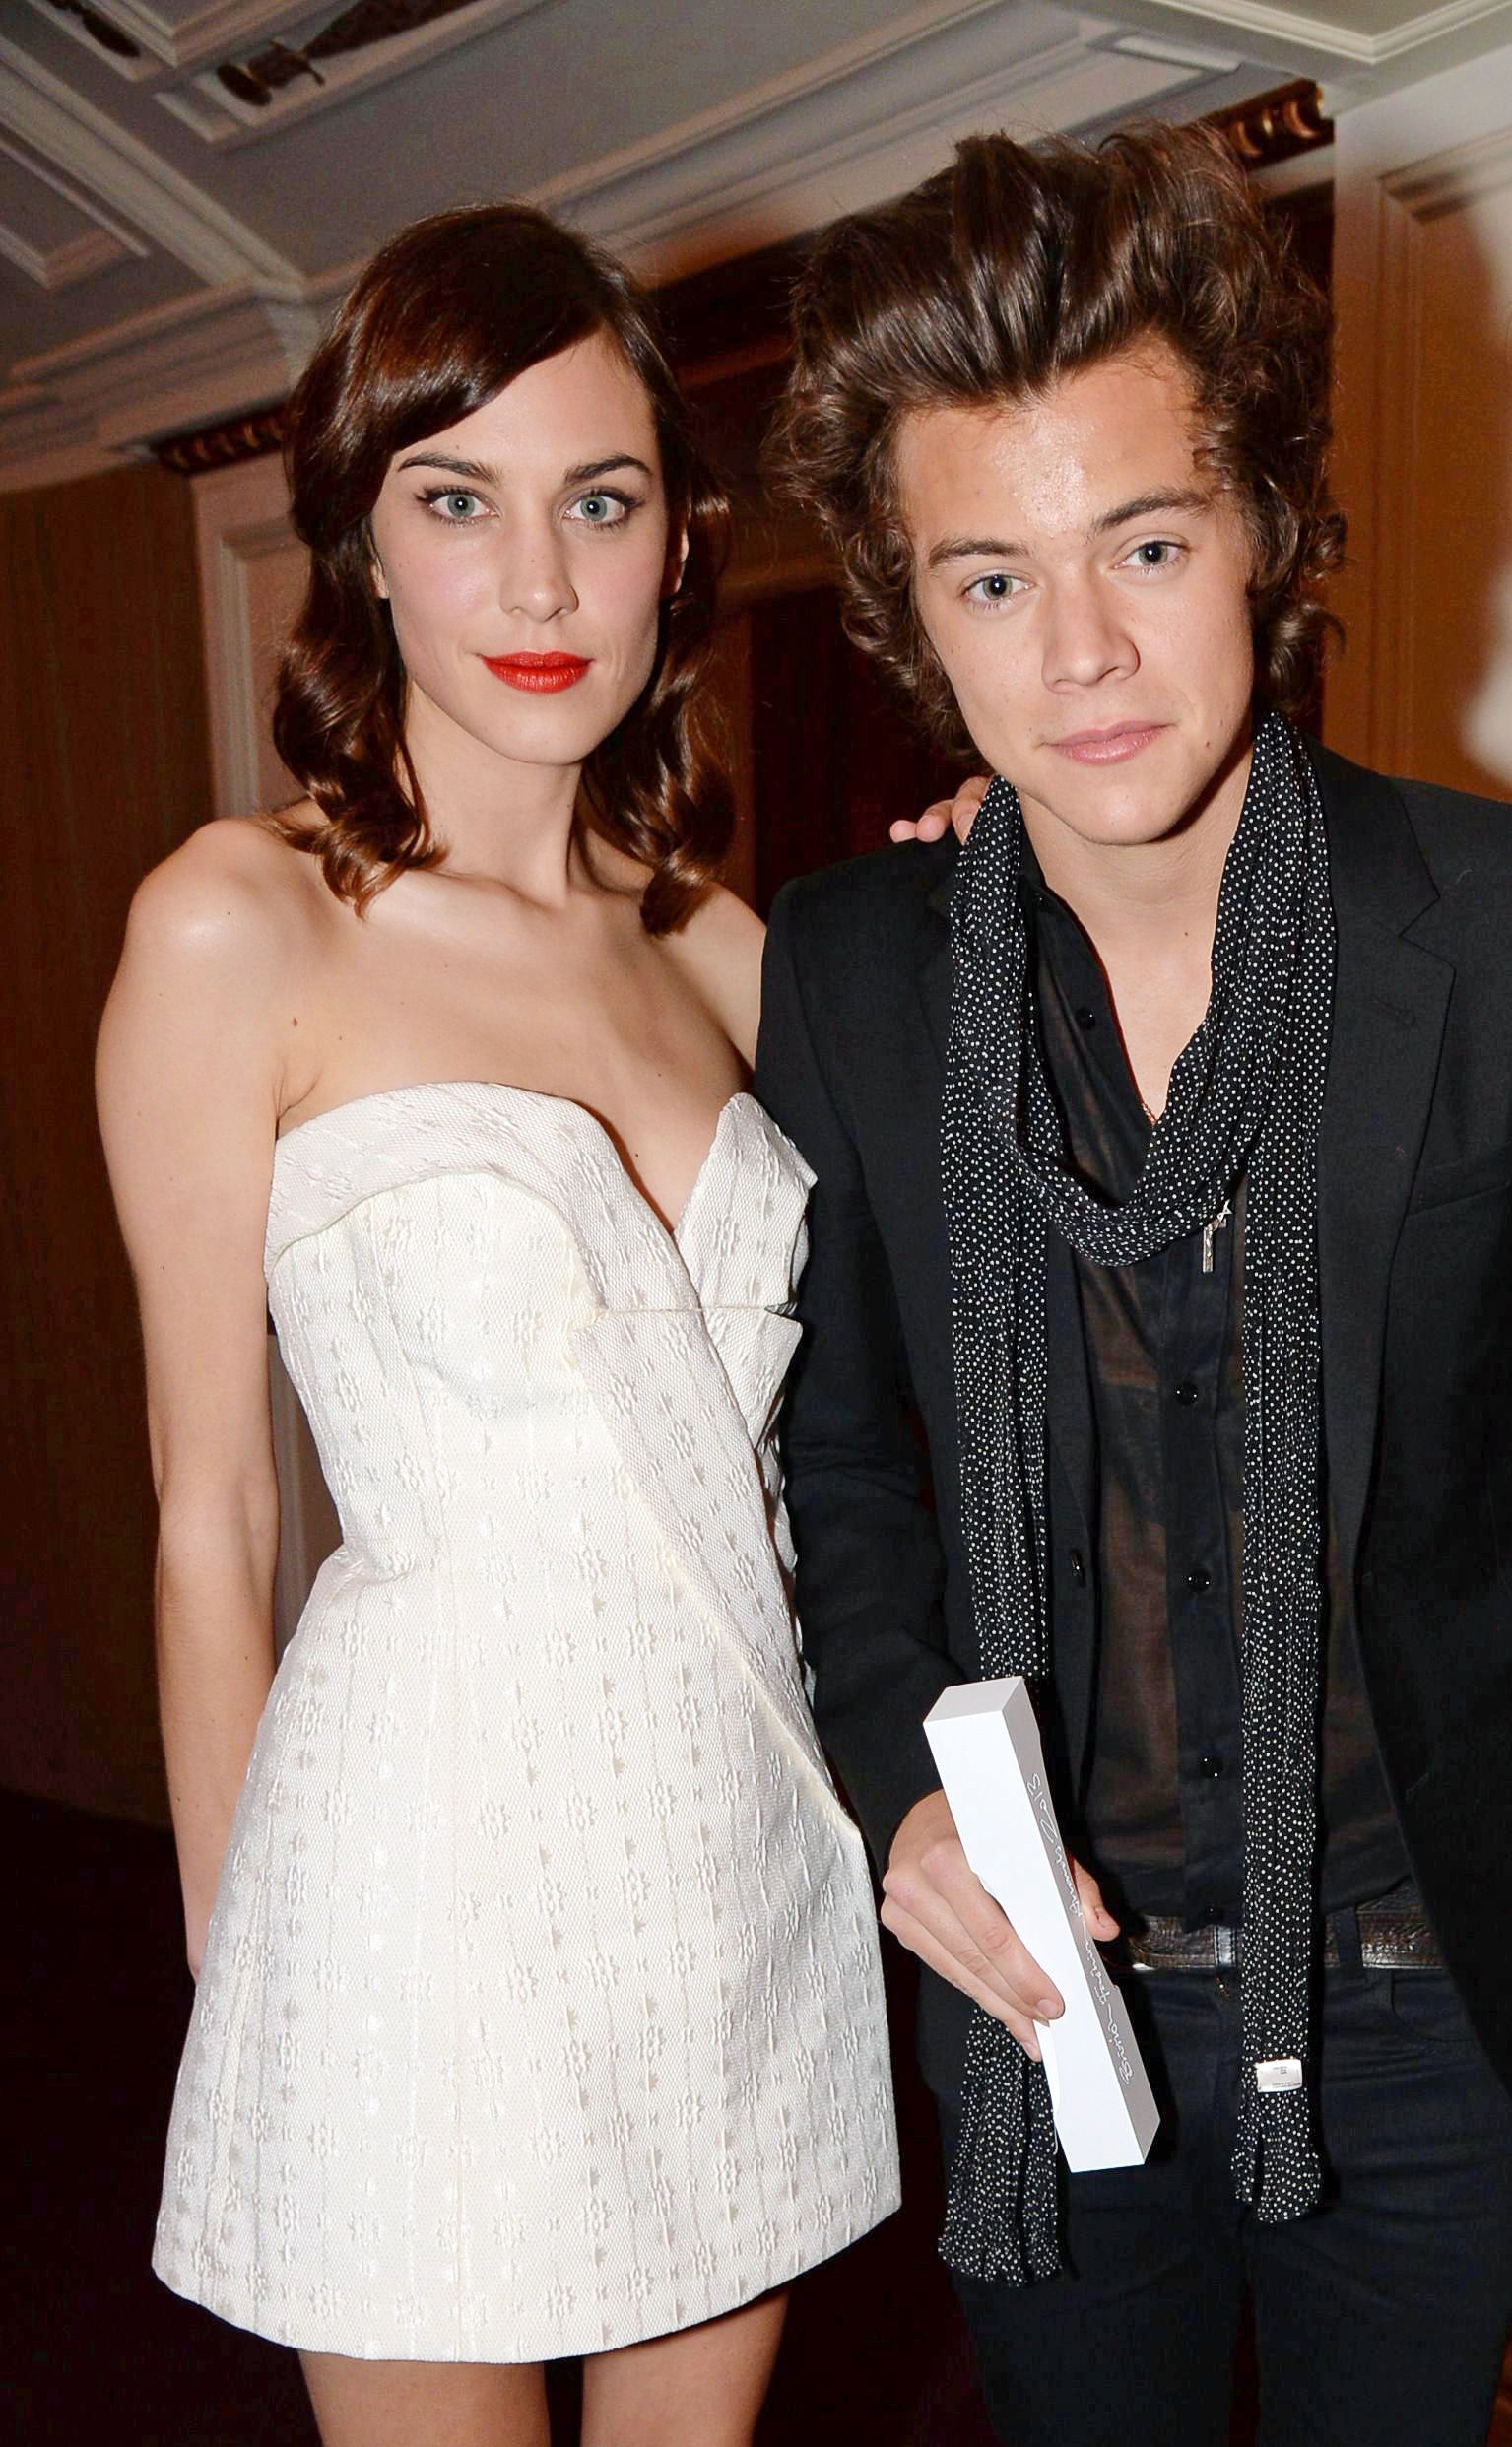 Harry Styles Girlfriend Guide To Past Relationships, Love Life